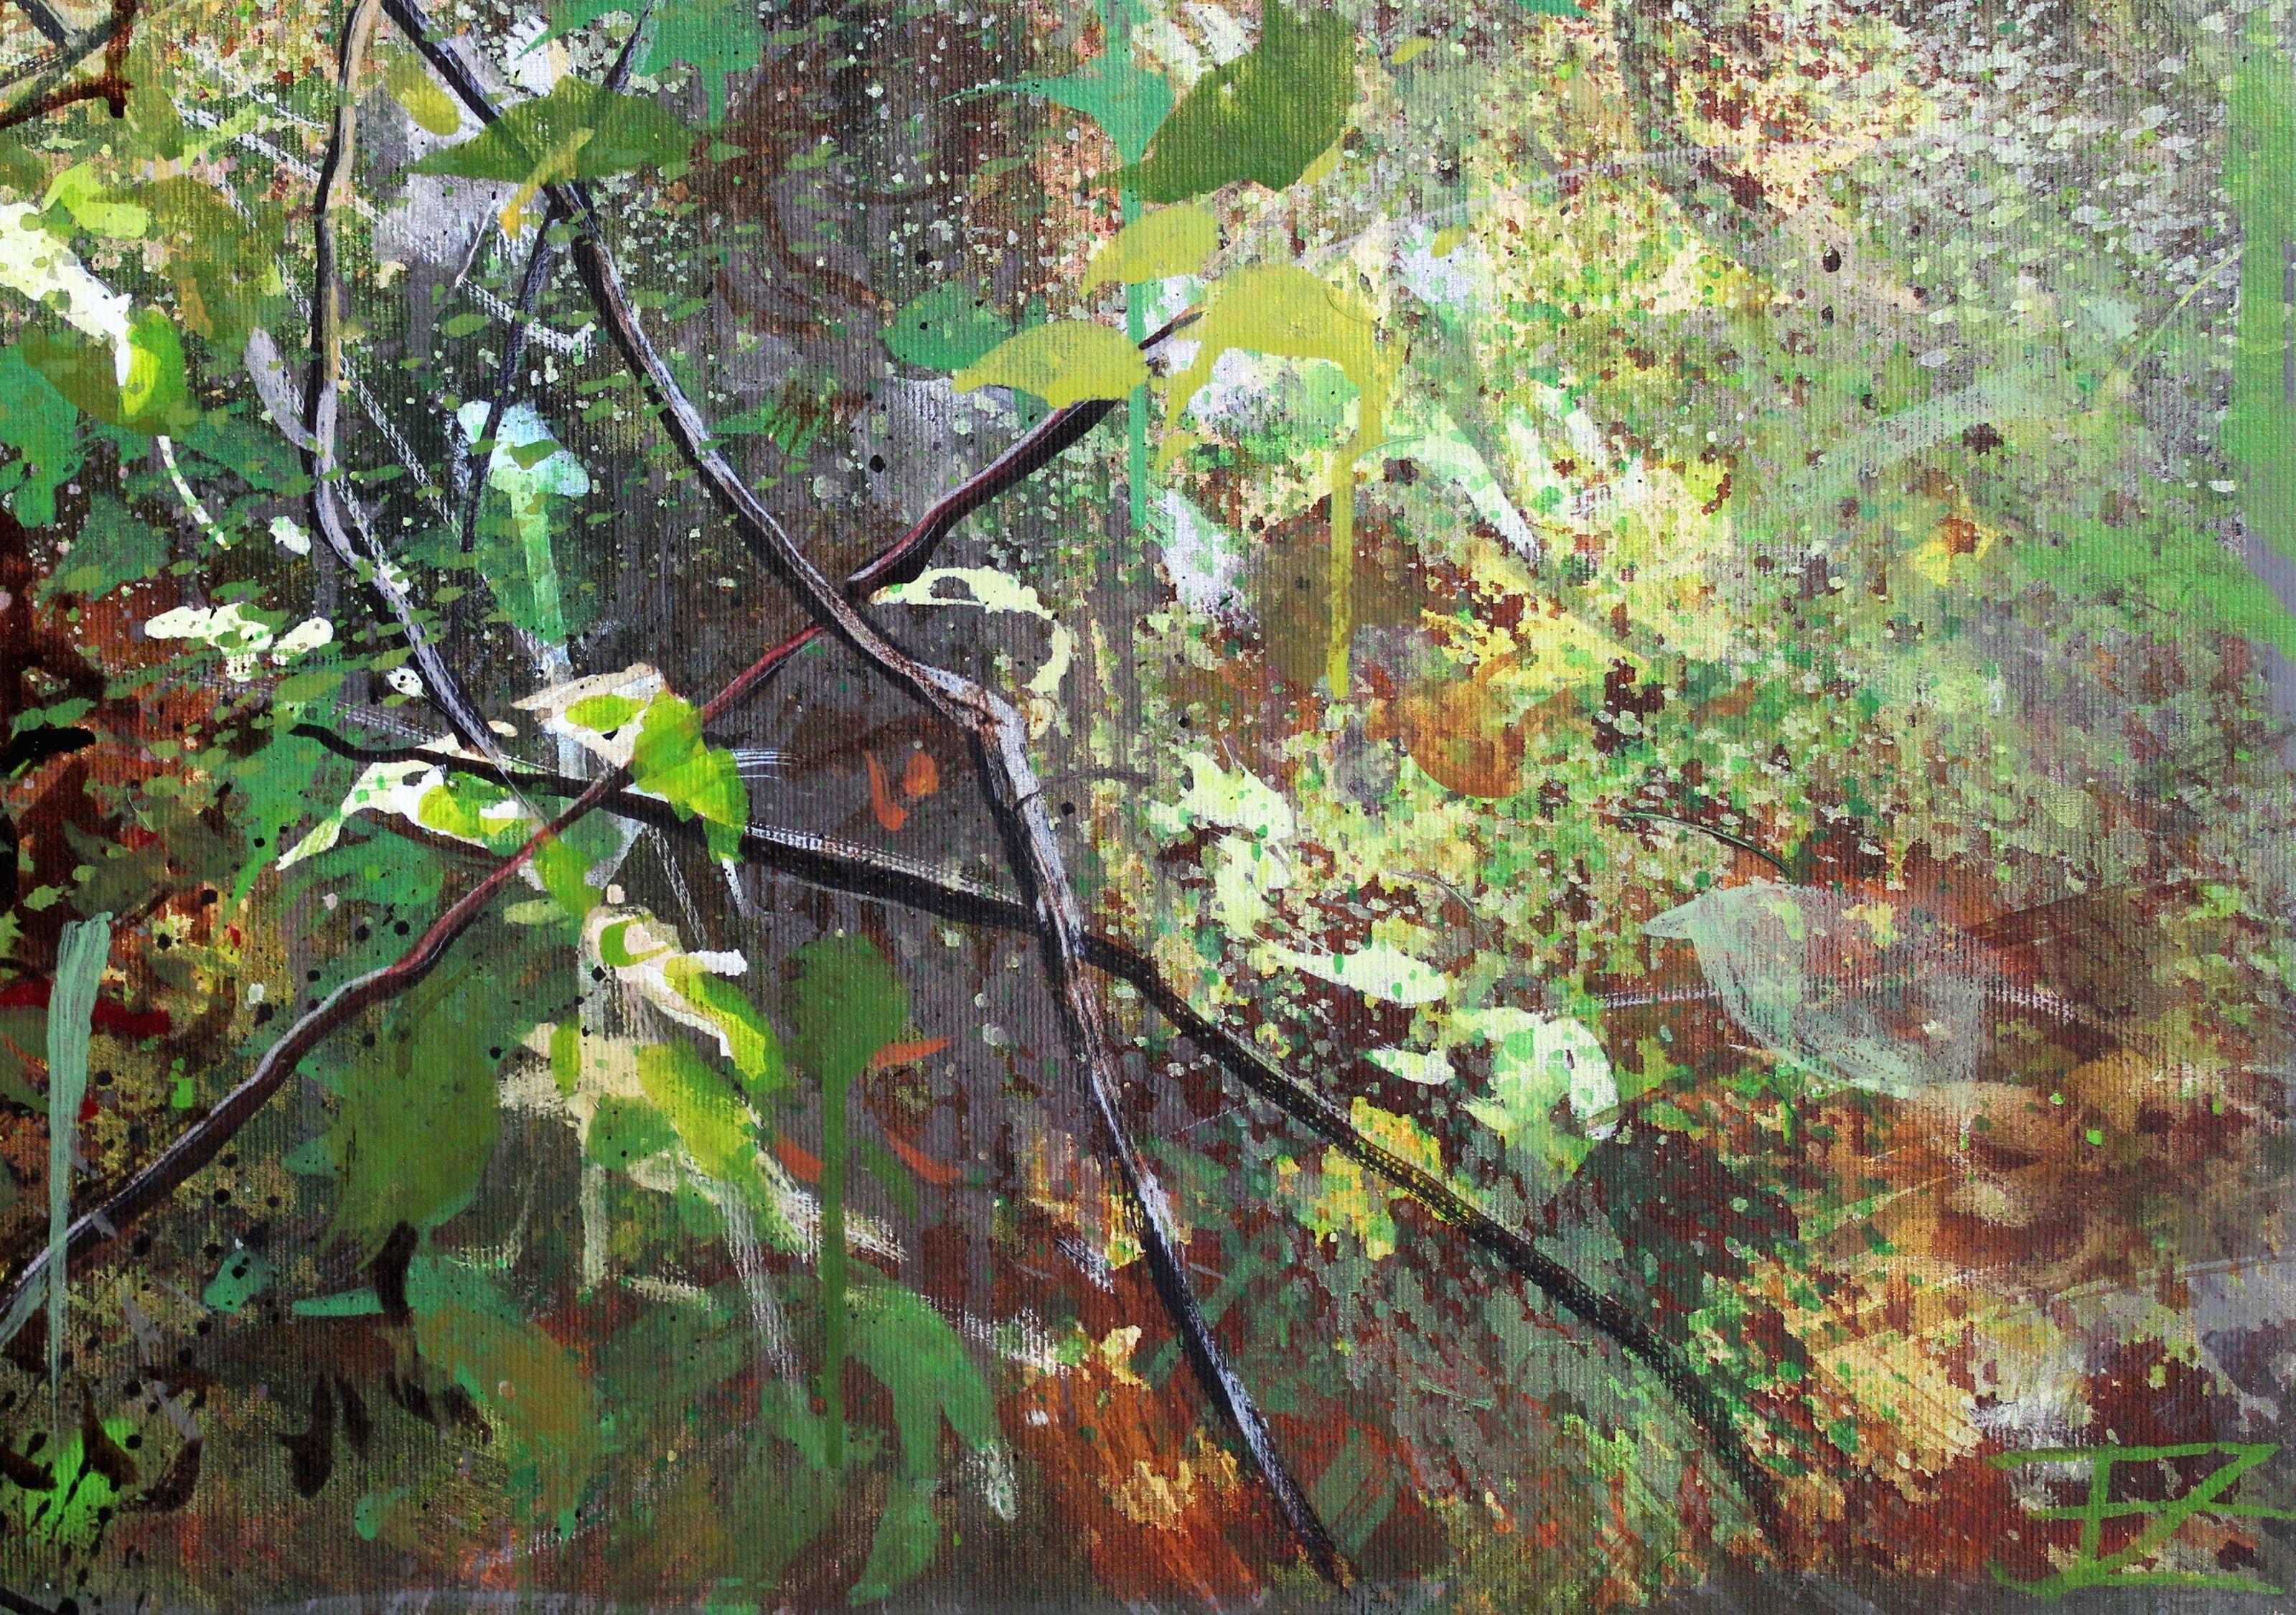 On the forest trail. 2023, canvas, acrylic, 90x120 cm

